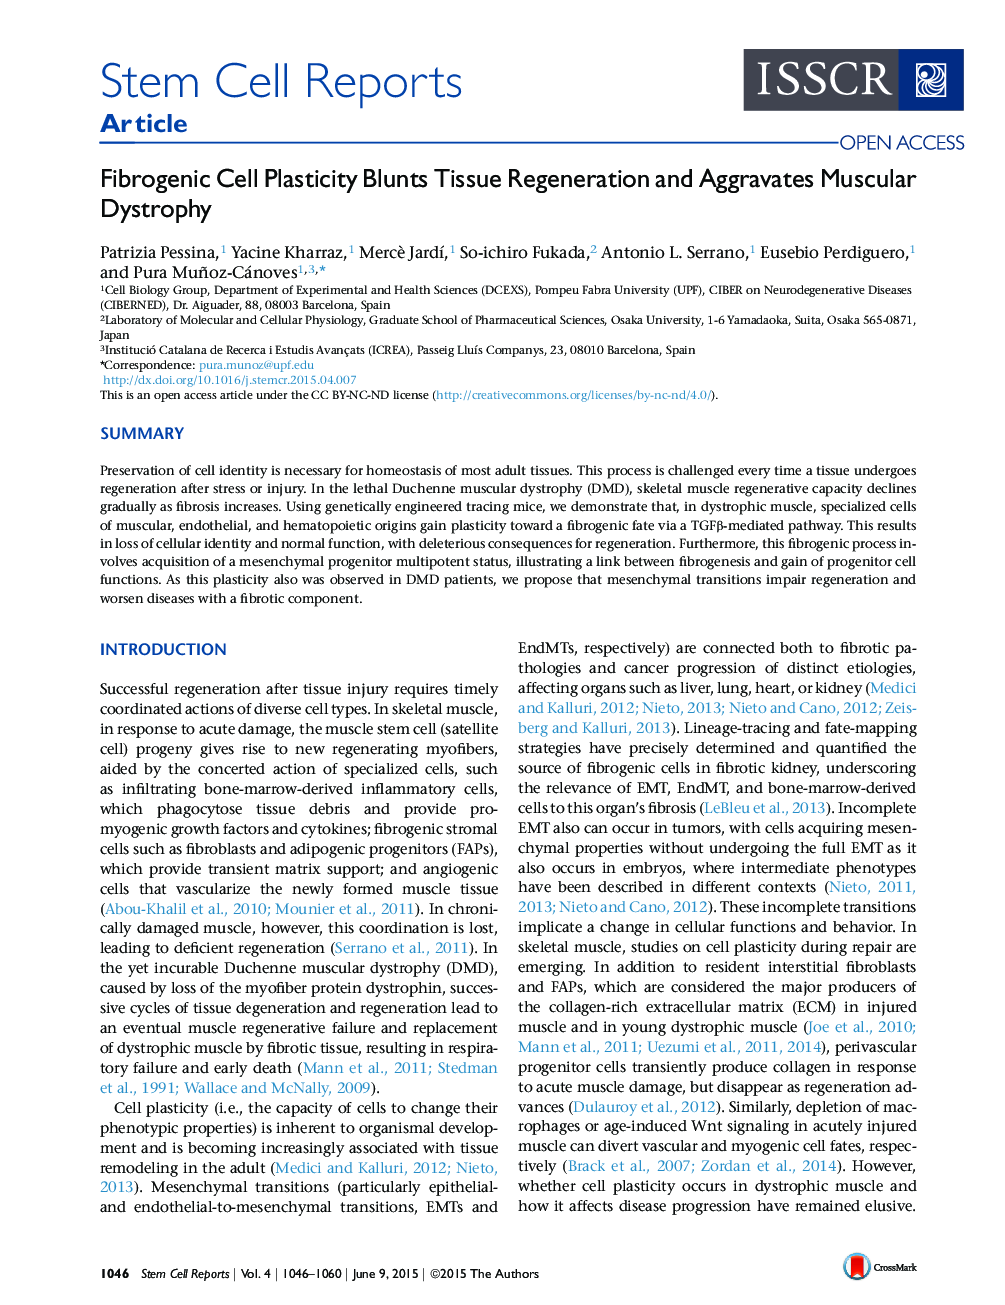 Fibrogenic Cell Plasticity Blunts Tissue Regeneration and Aggravates Muscular Dystrophy 